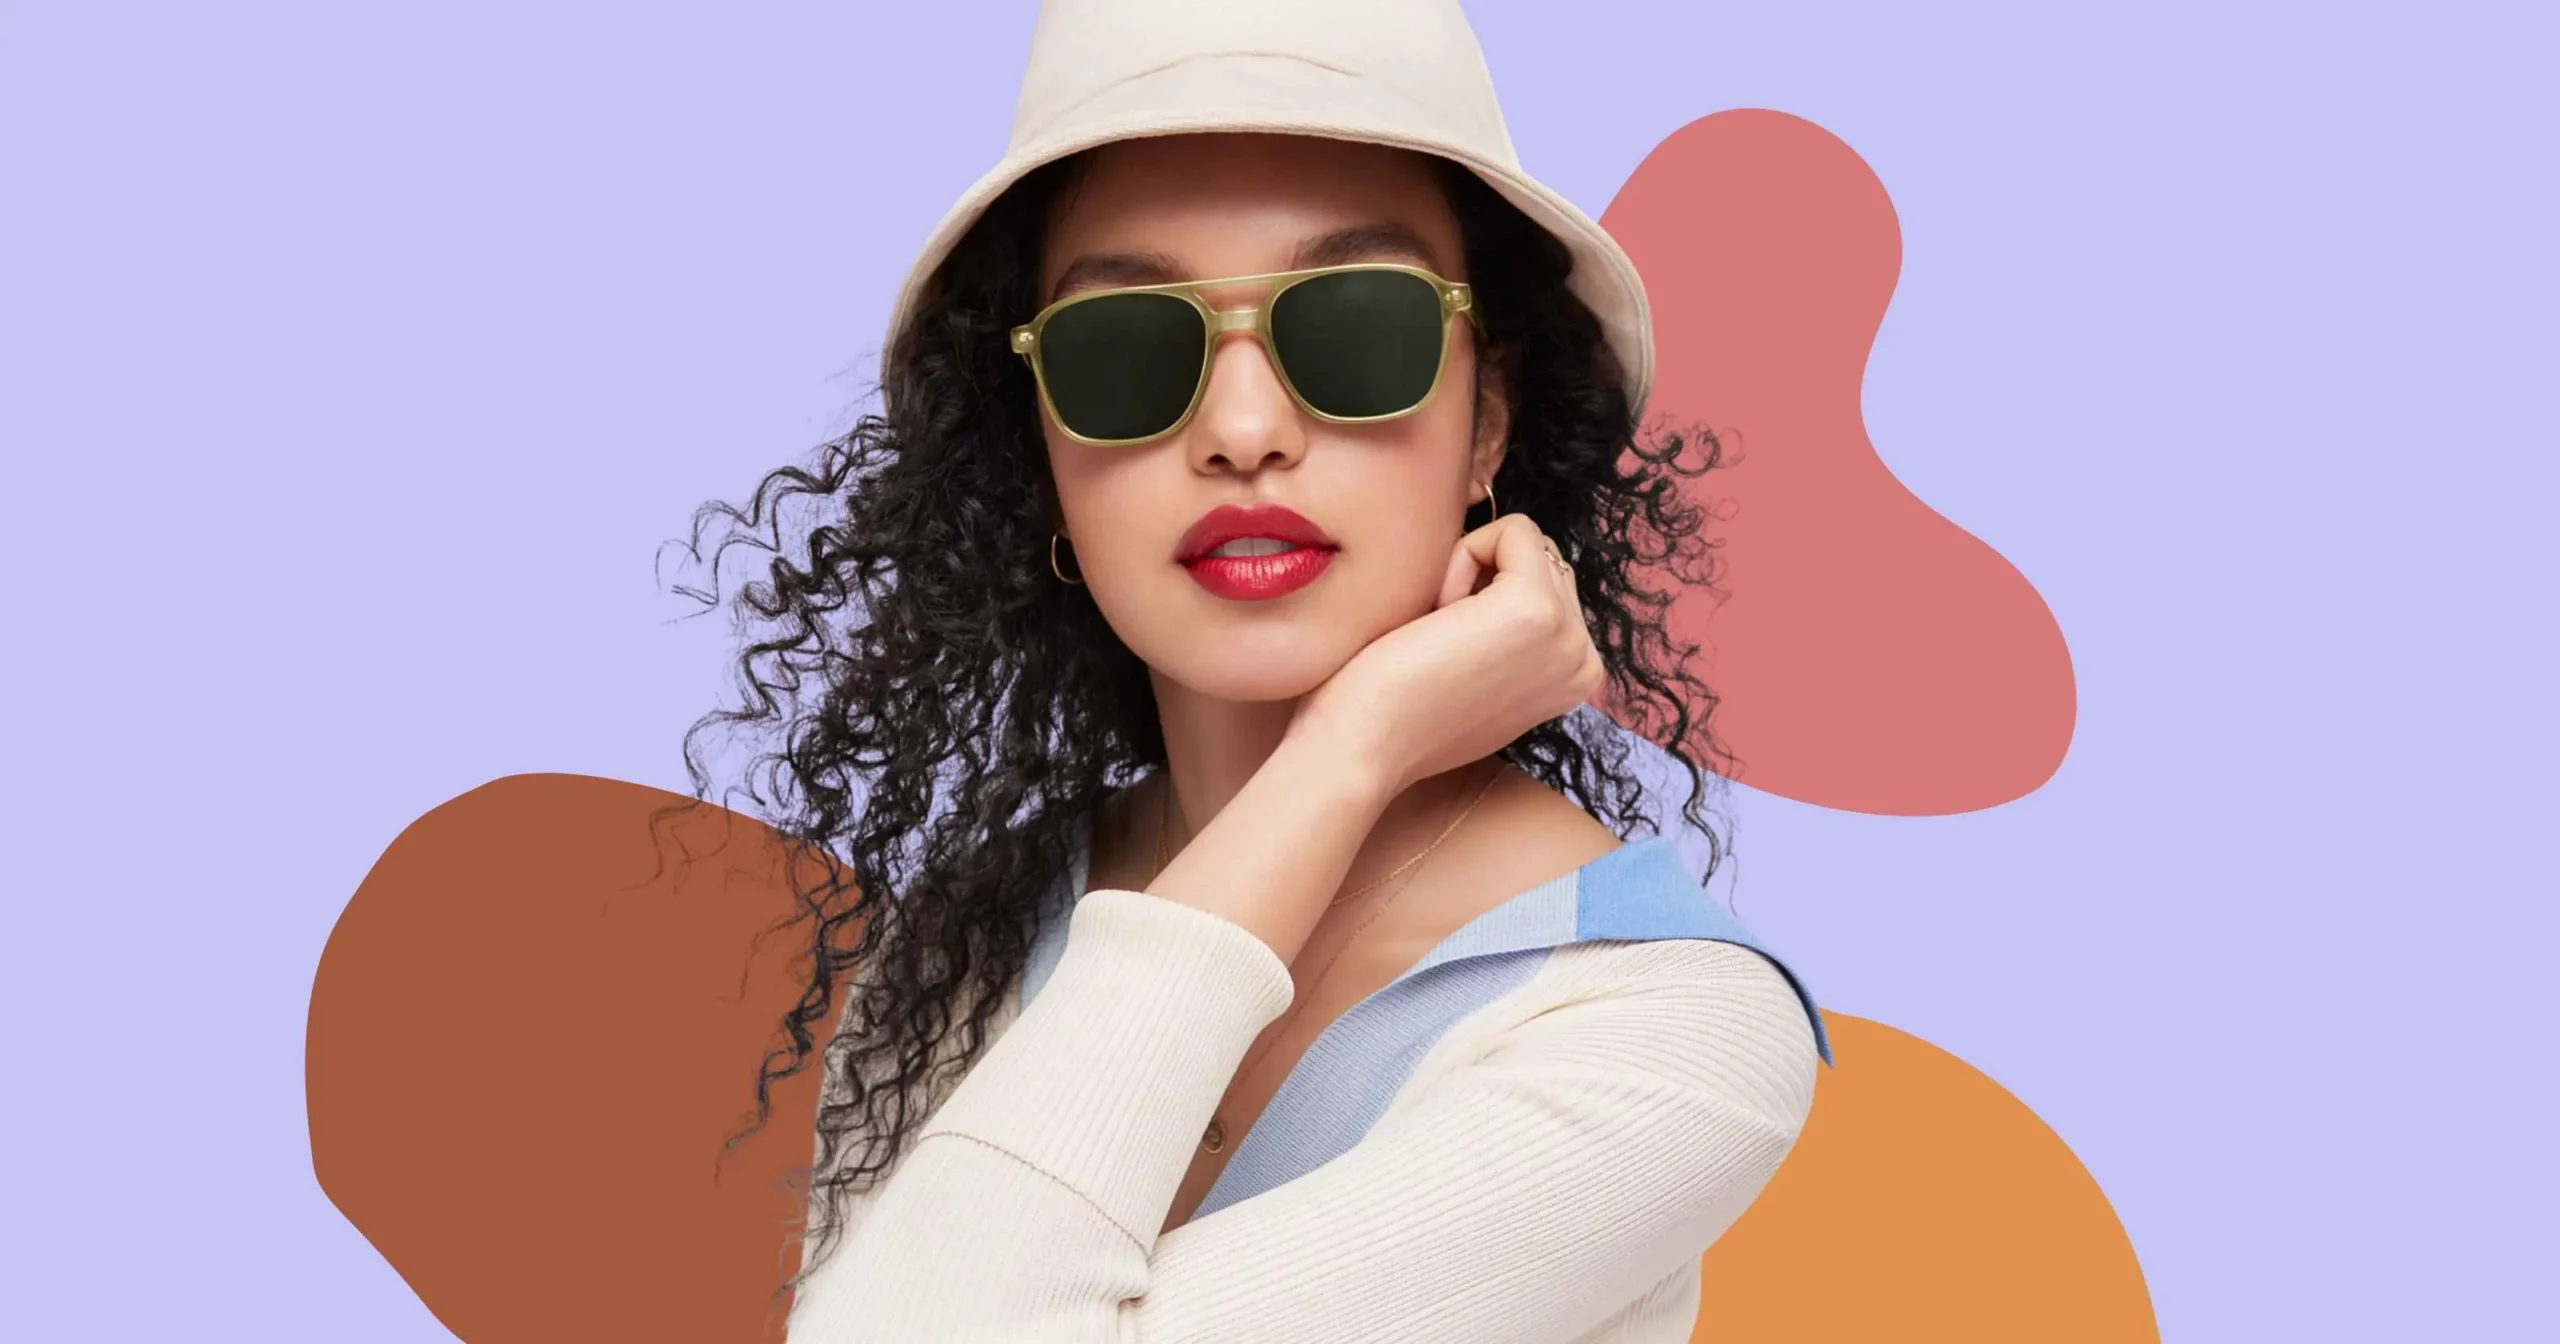 13 Brands Like Warby Parker To Up Your Eyewear Game